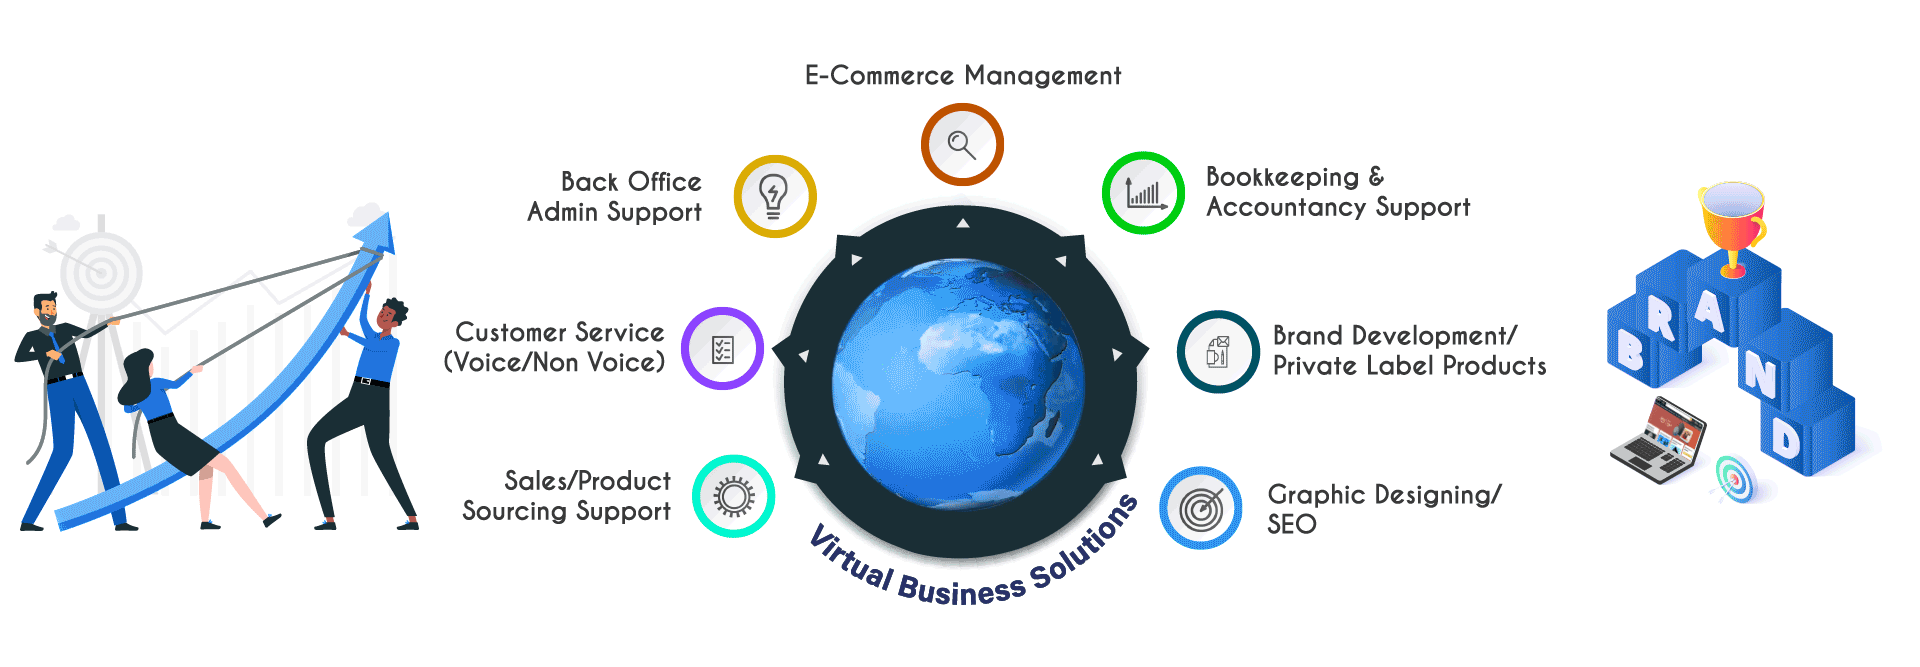 Virtual Business Solution